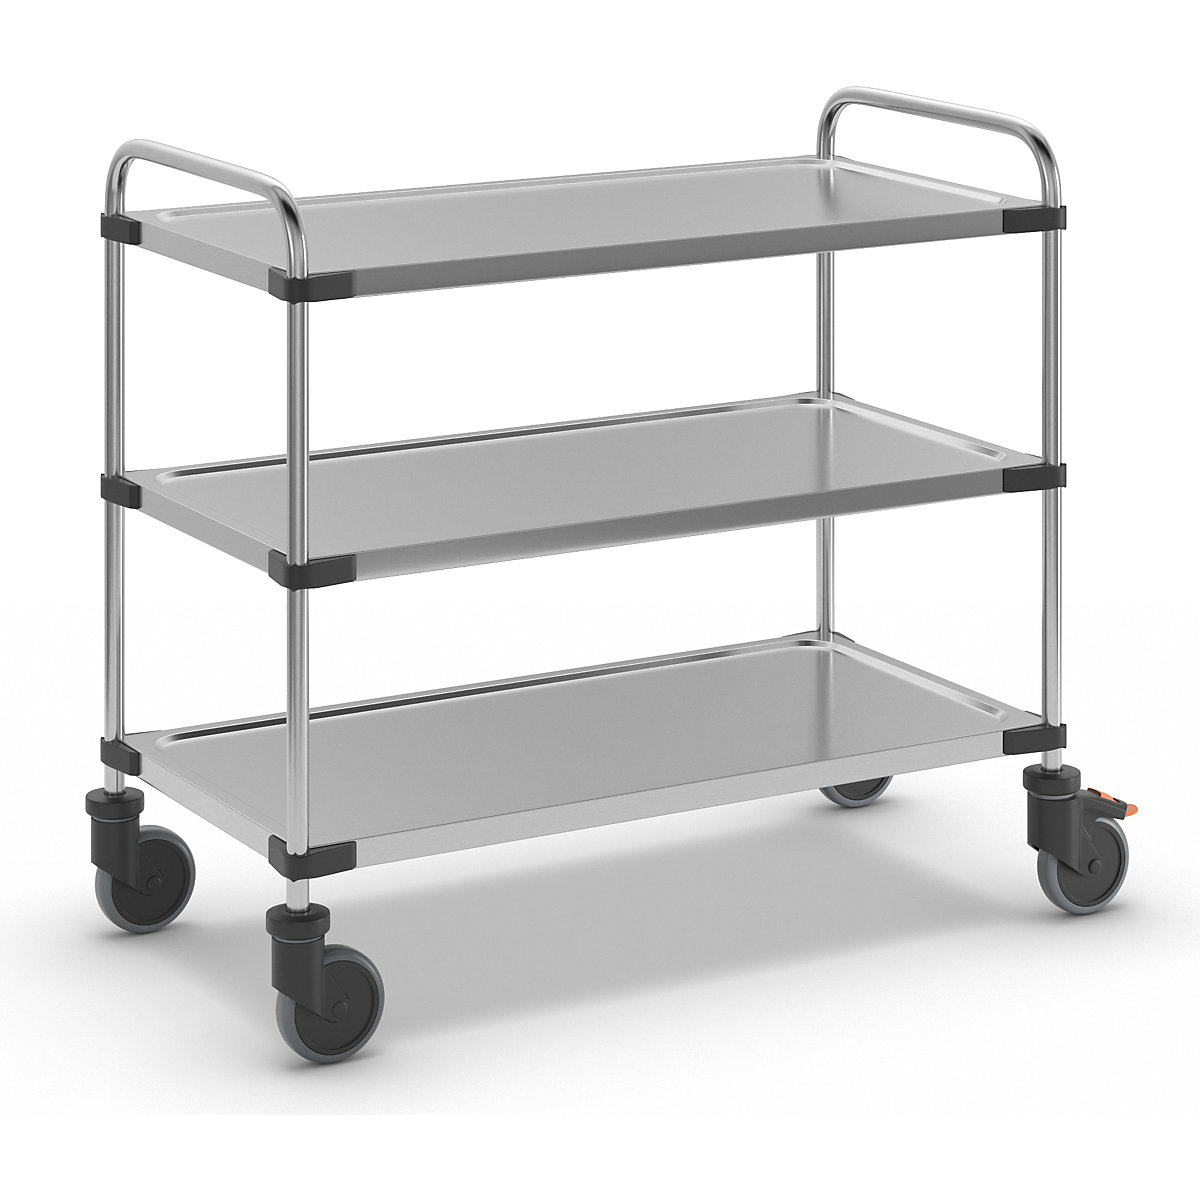 Stainless steel table trolley, with 3 shelves, LxWxH 1070 x 570 x 950 mm, assembled-9